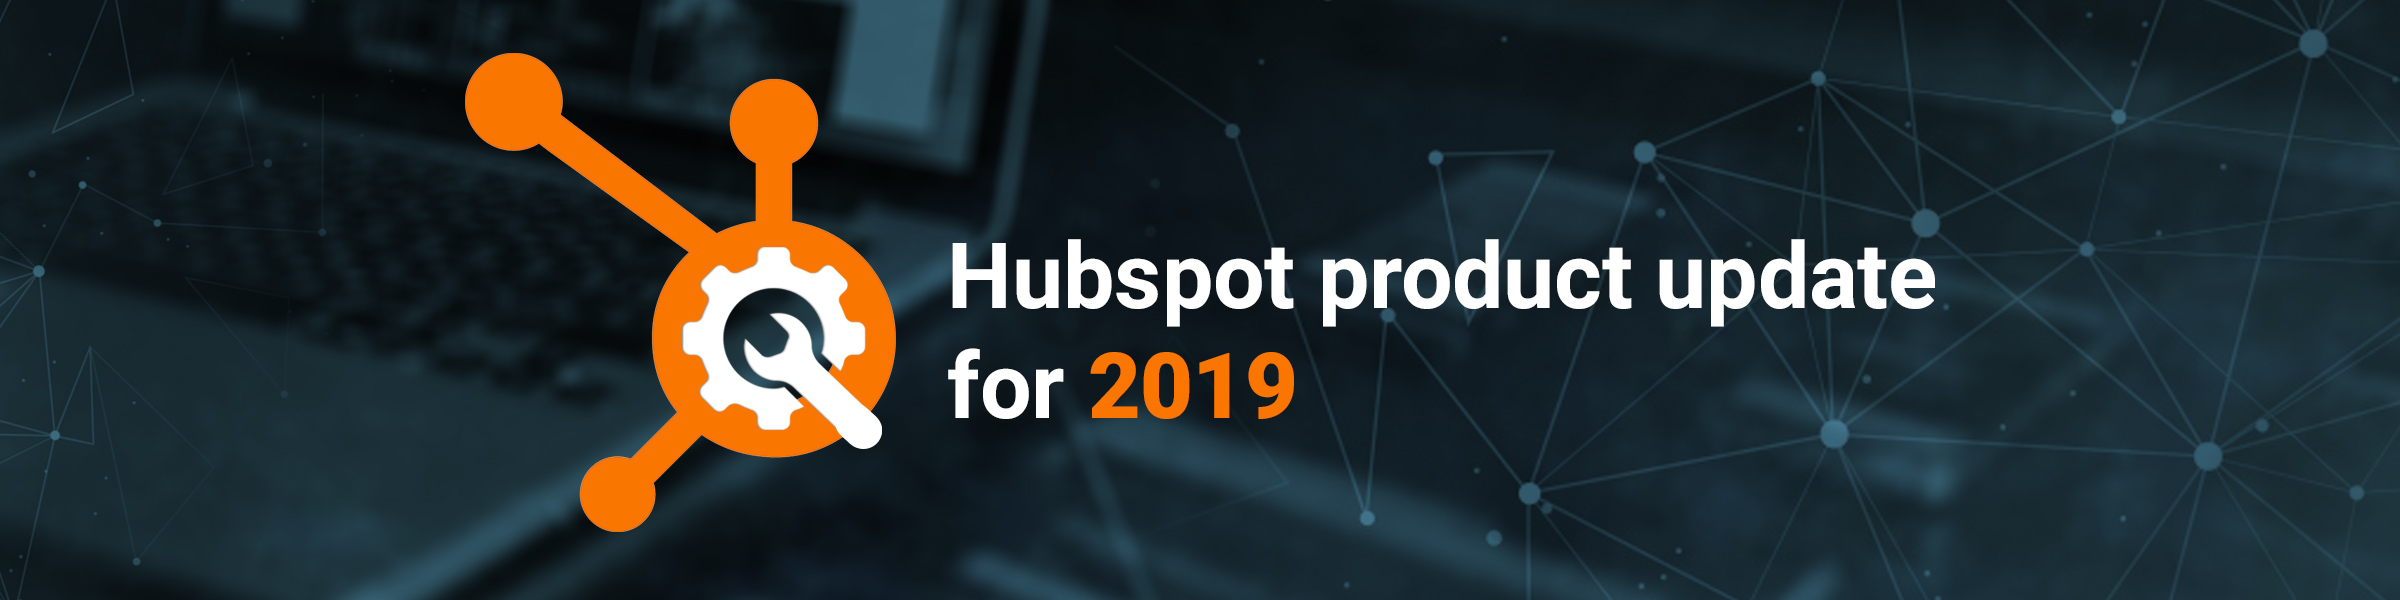 Hubspot product update for 2019